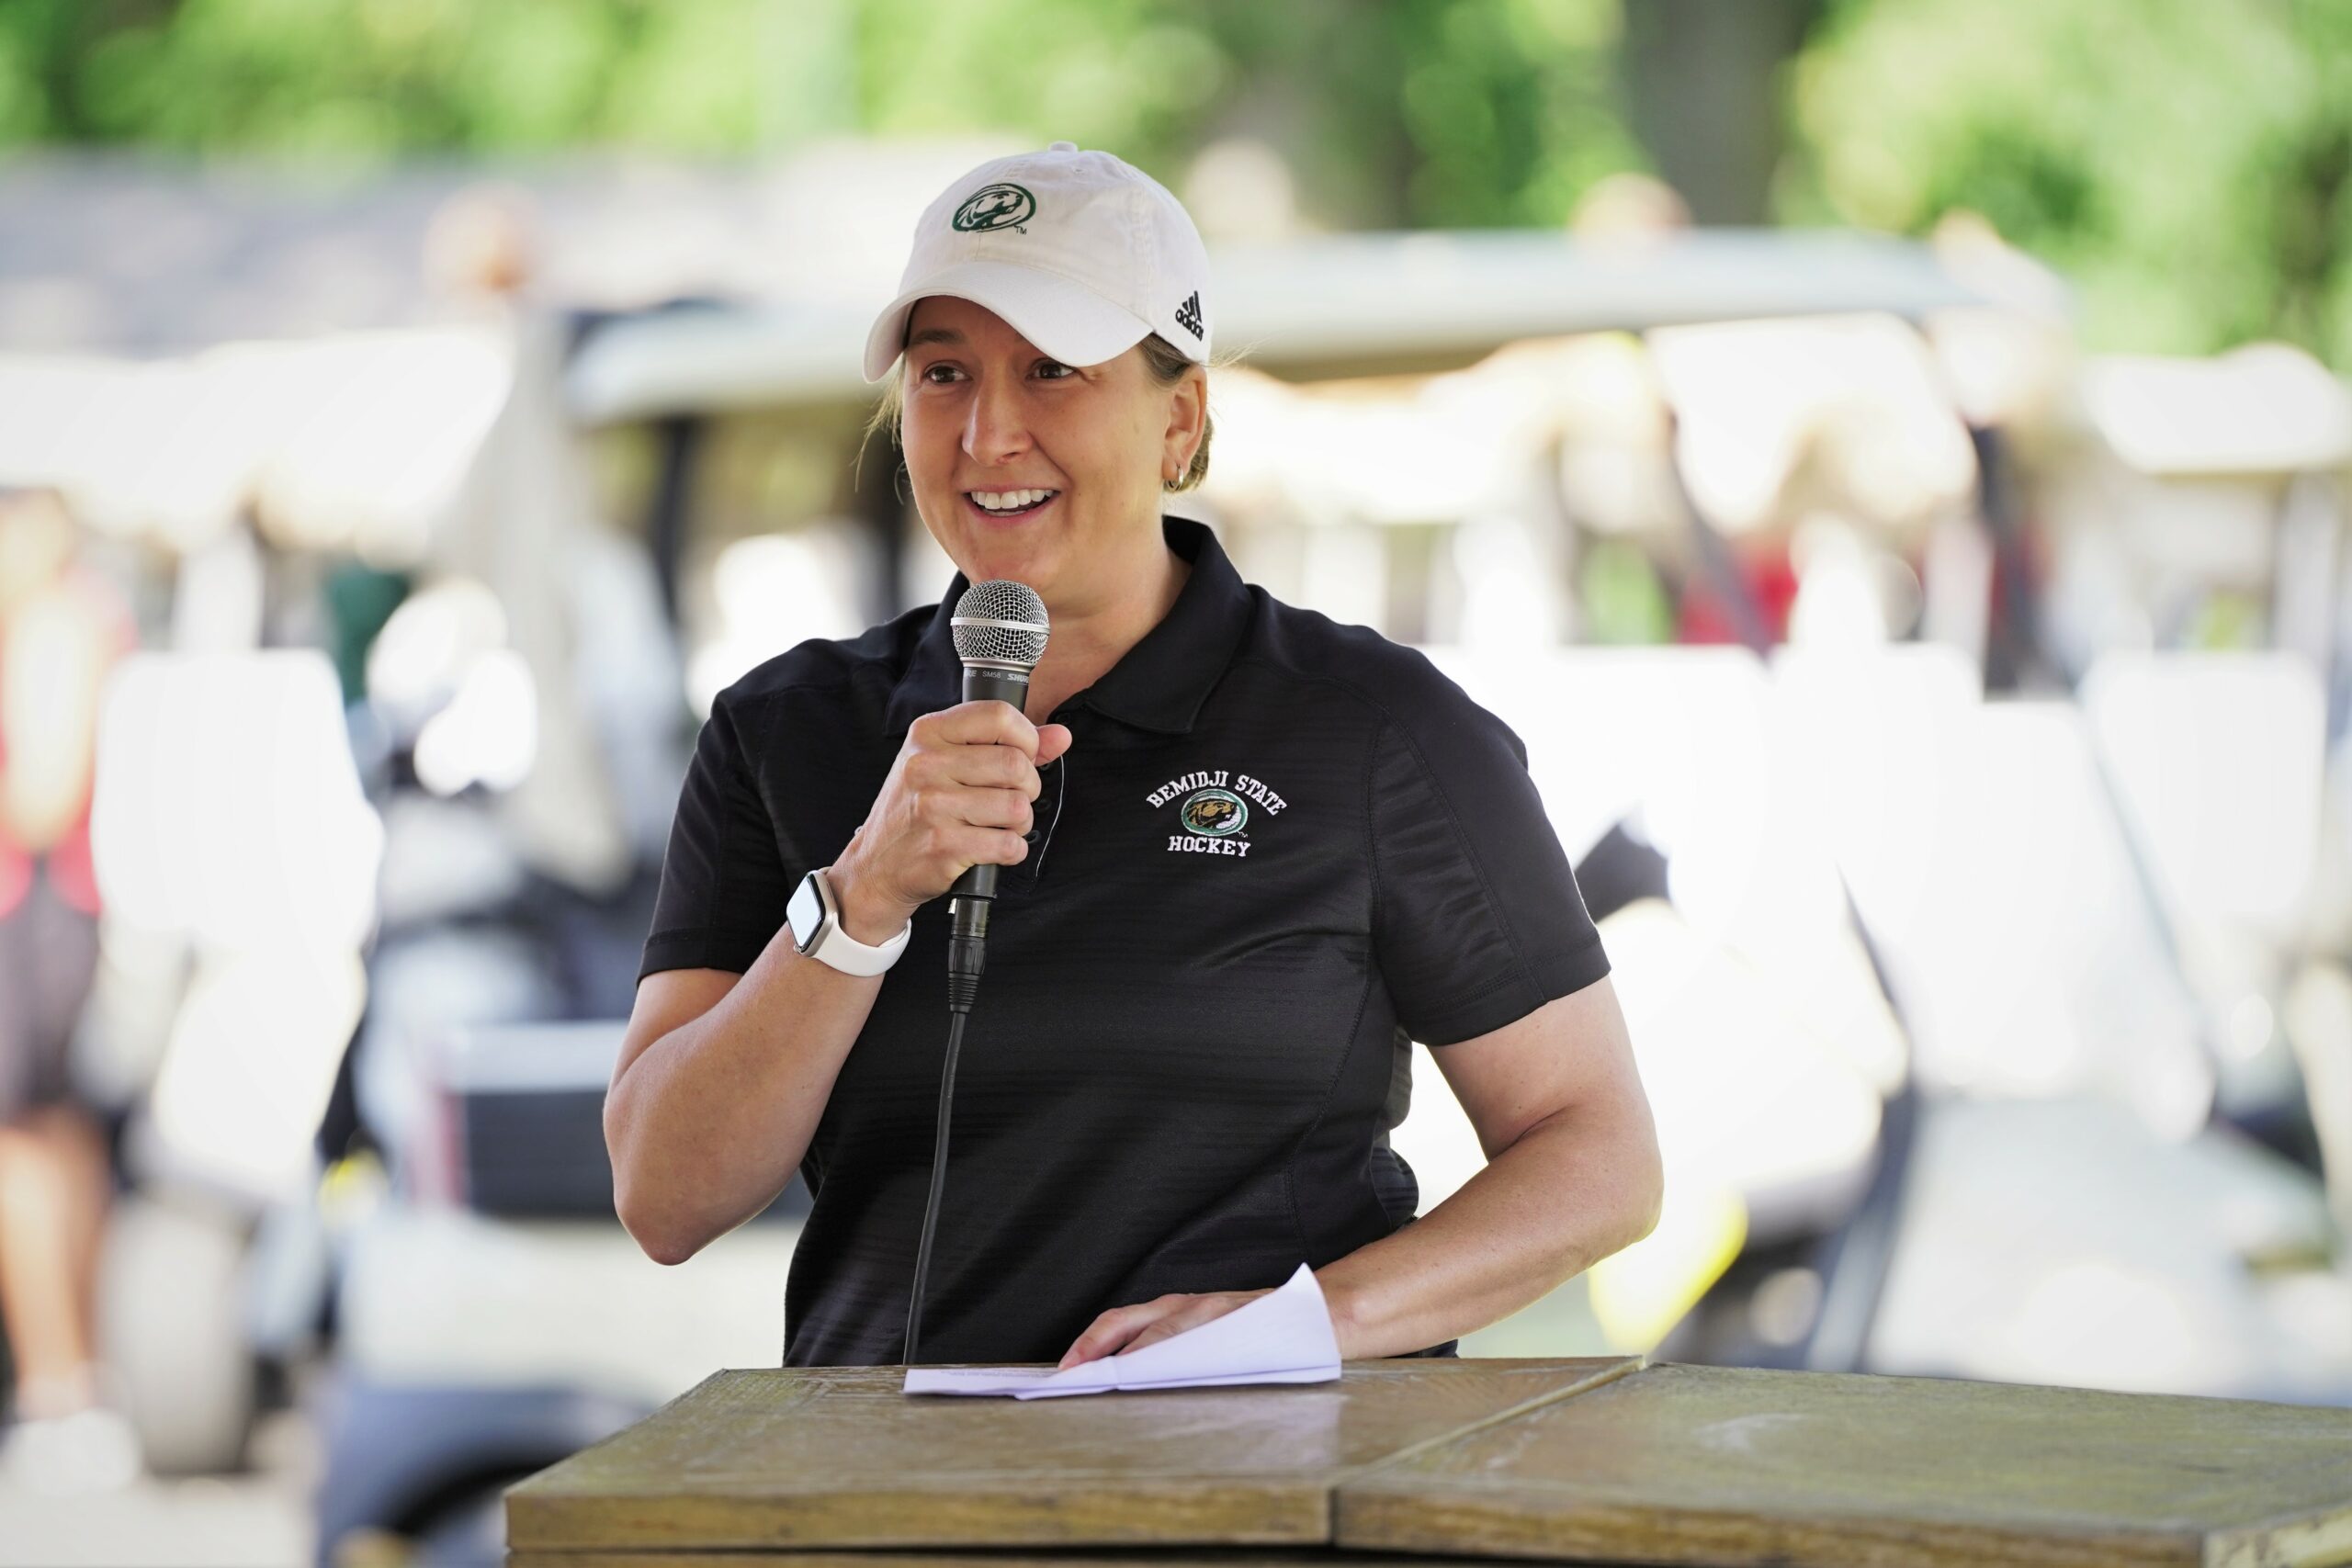 Bemidji State women's hockey associate head coach Amber Fryklund delivers a speech during the Howe-Welle Women's Athletics Golf Tournament on Friday, Aug. 25, 2023, at the Bemidji Town and Country Club. (Micah Friez / Bemidji State)